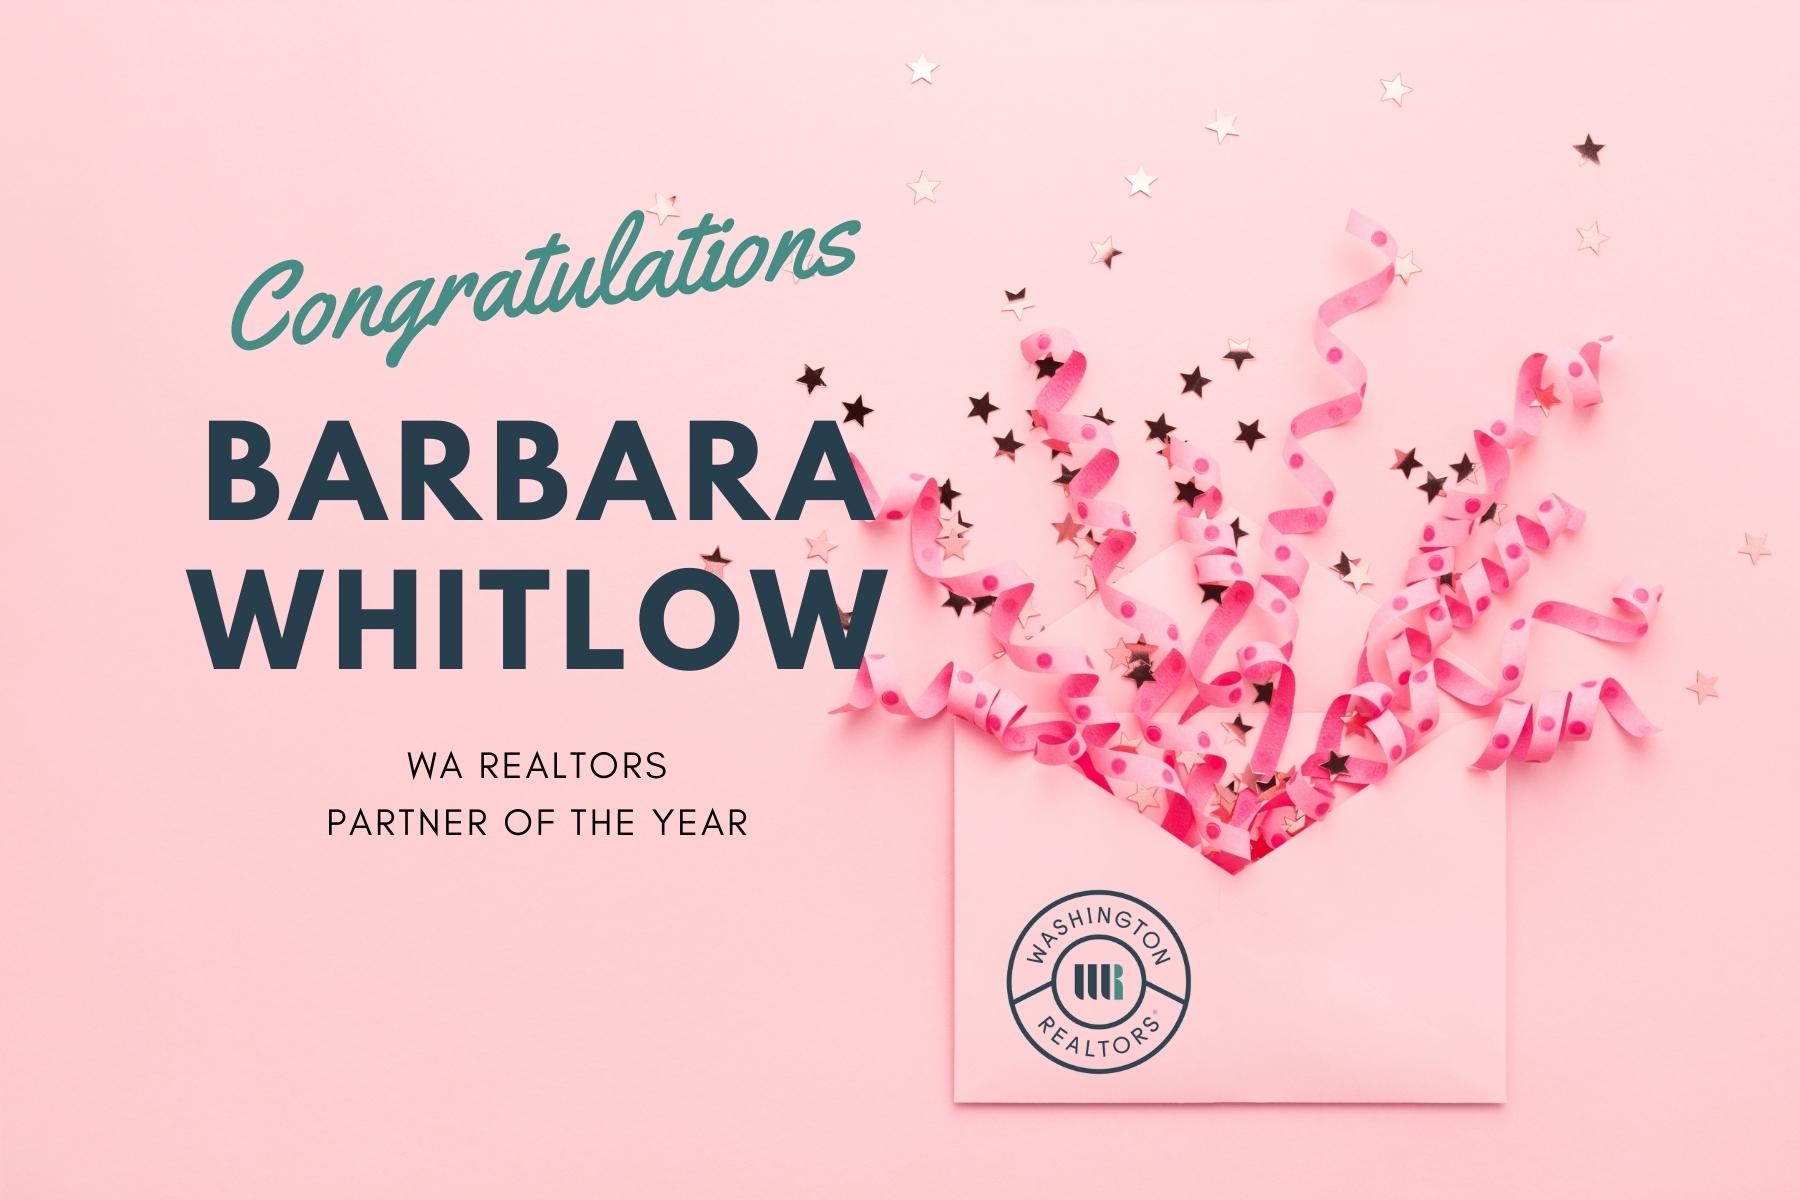 Recognition to Barbara Whitlow from the WA Realtors